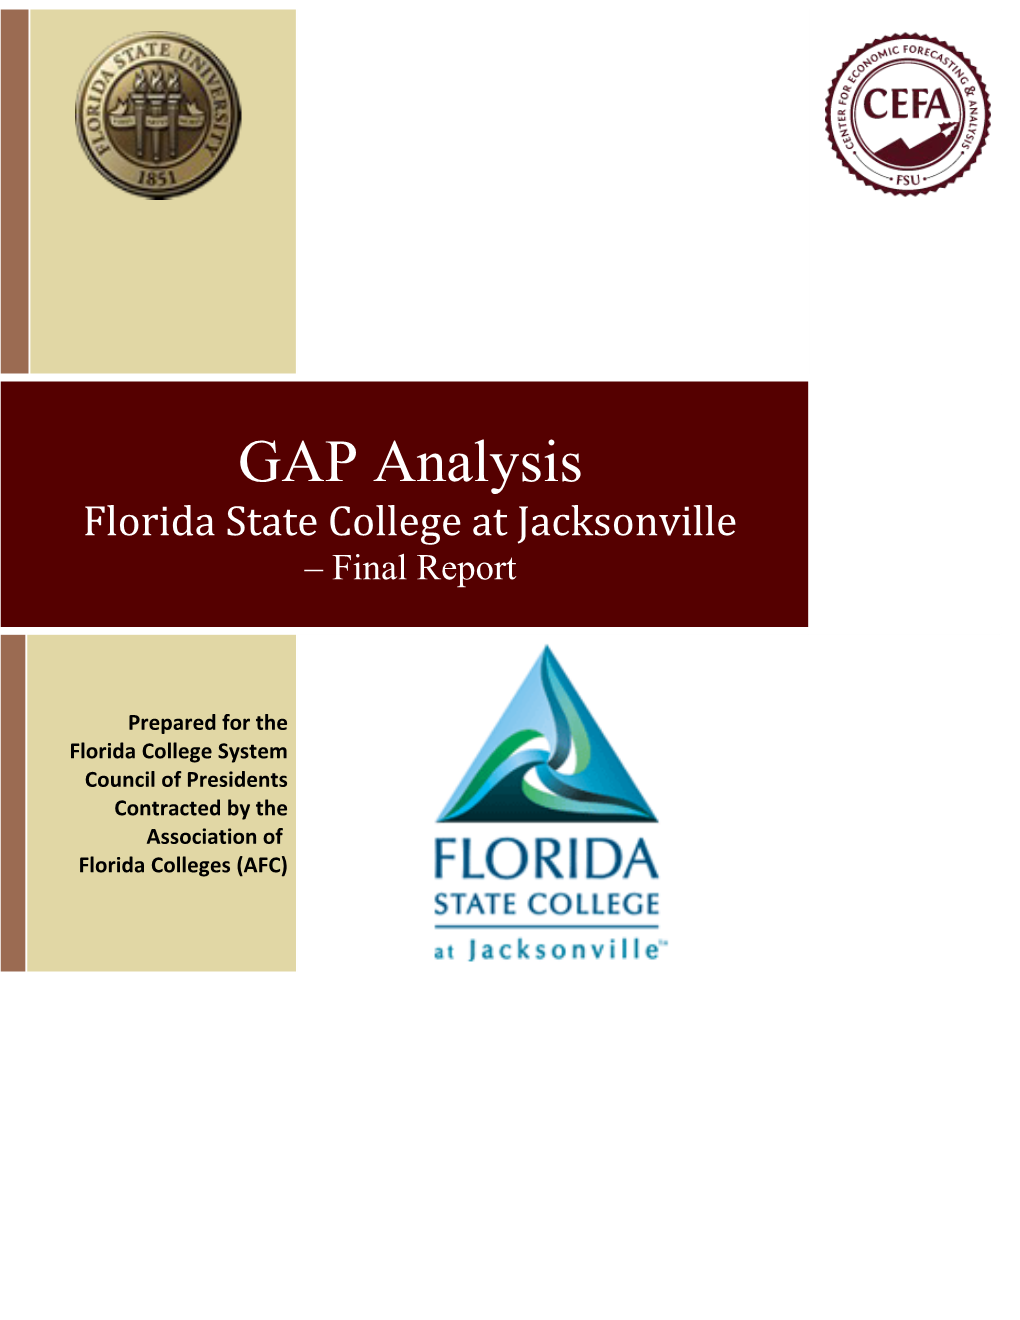 Executive Summary for the Florida College System